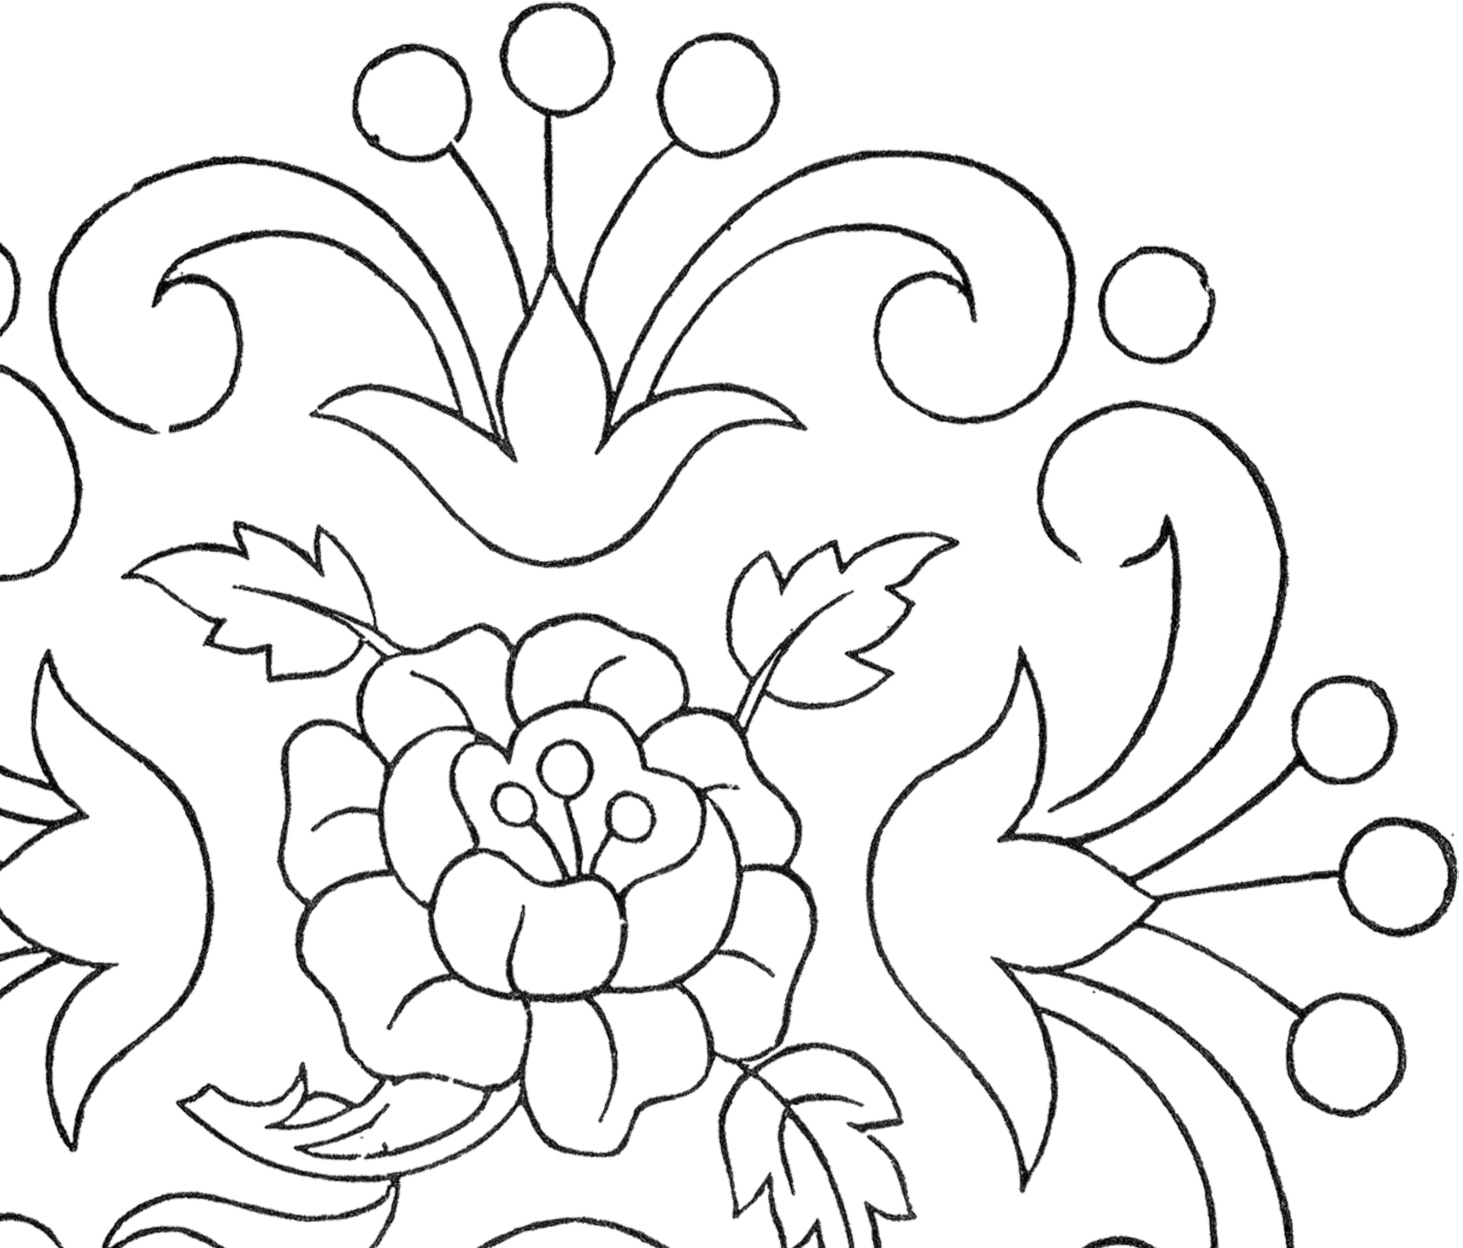 Brush Embroidery Patterns Vintage Floral Embroidery Pattern The Graphics Fairy